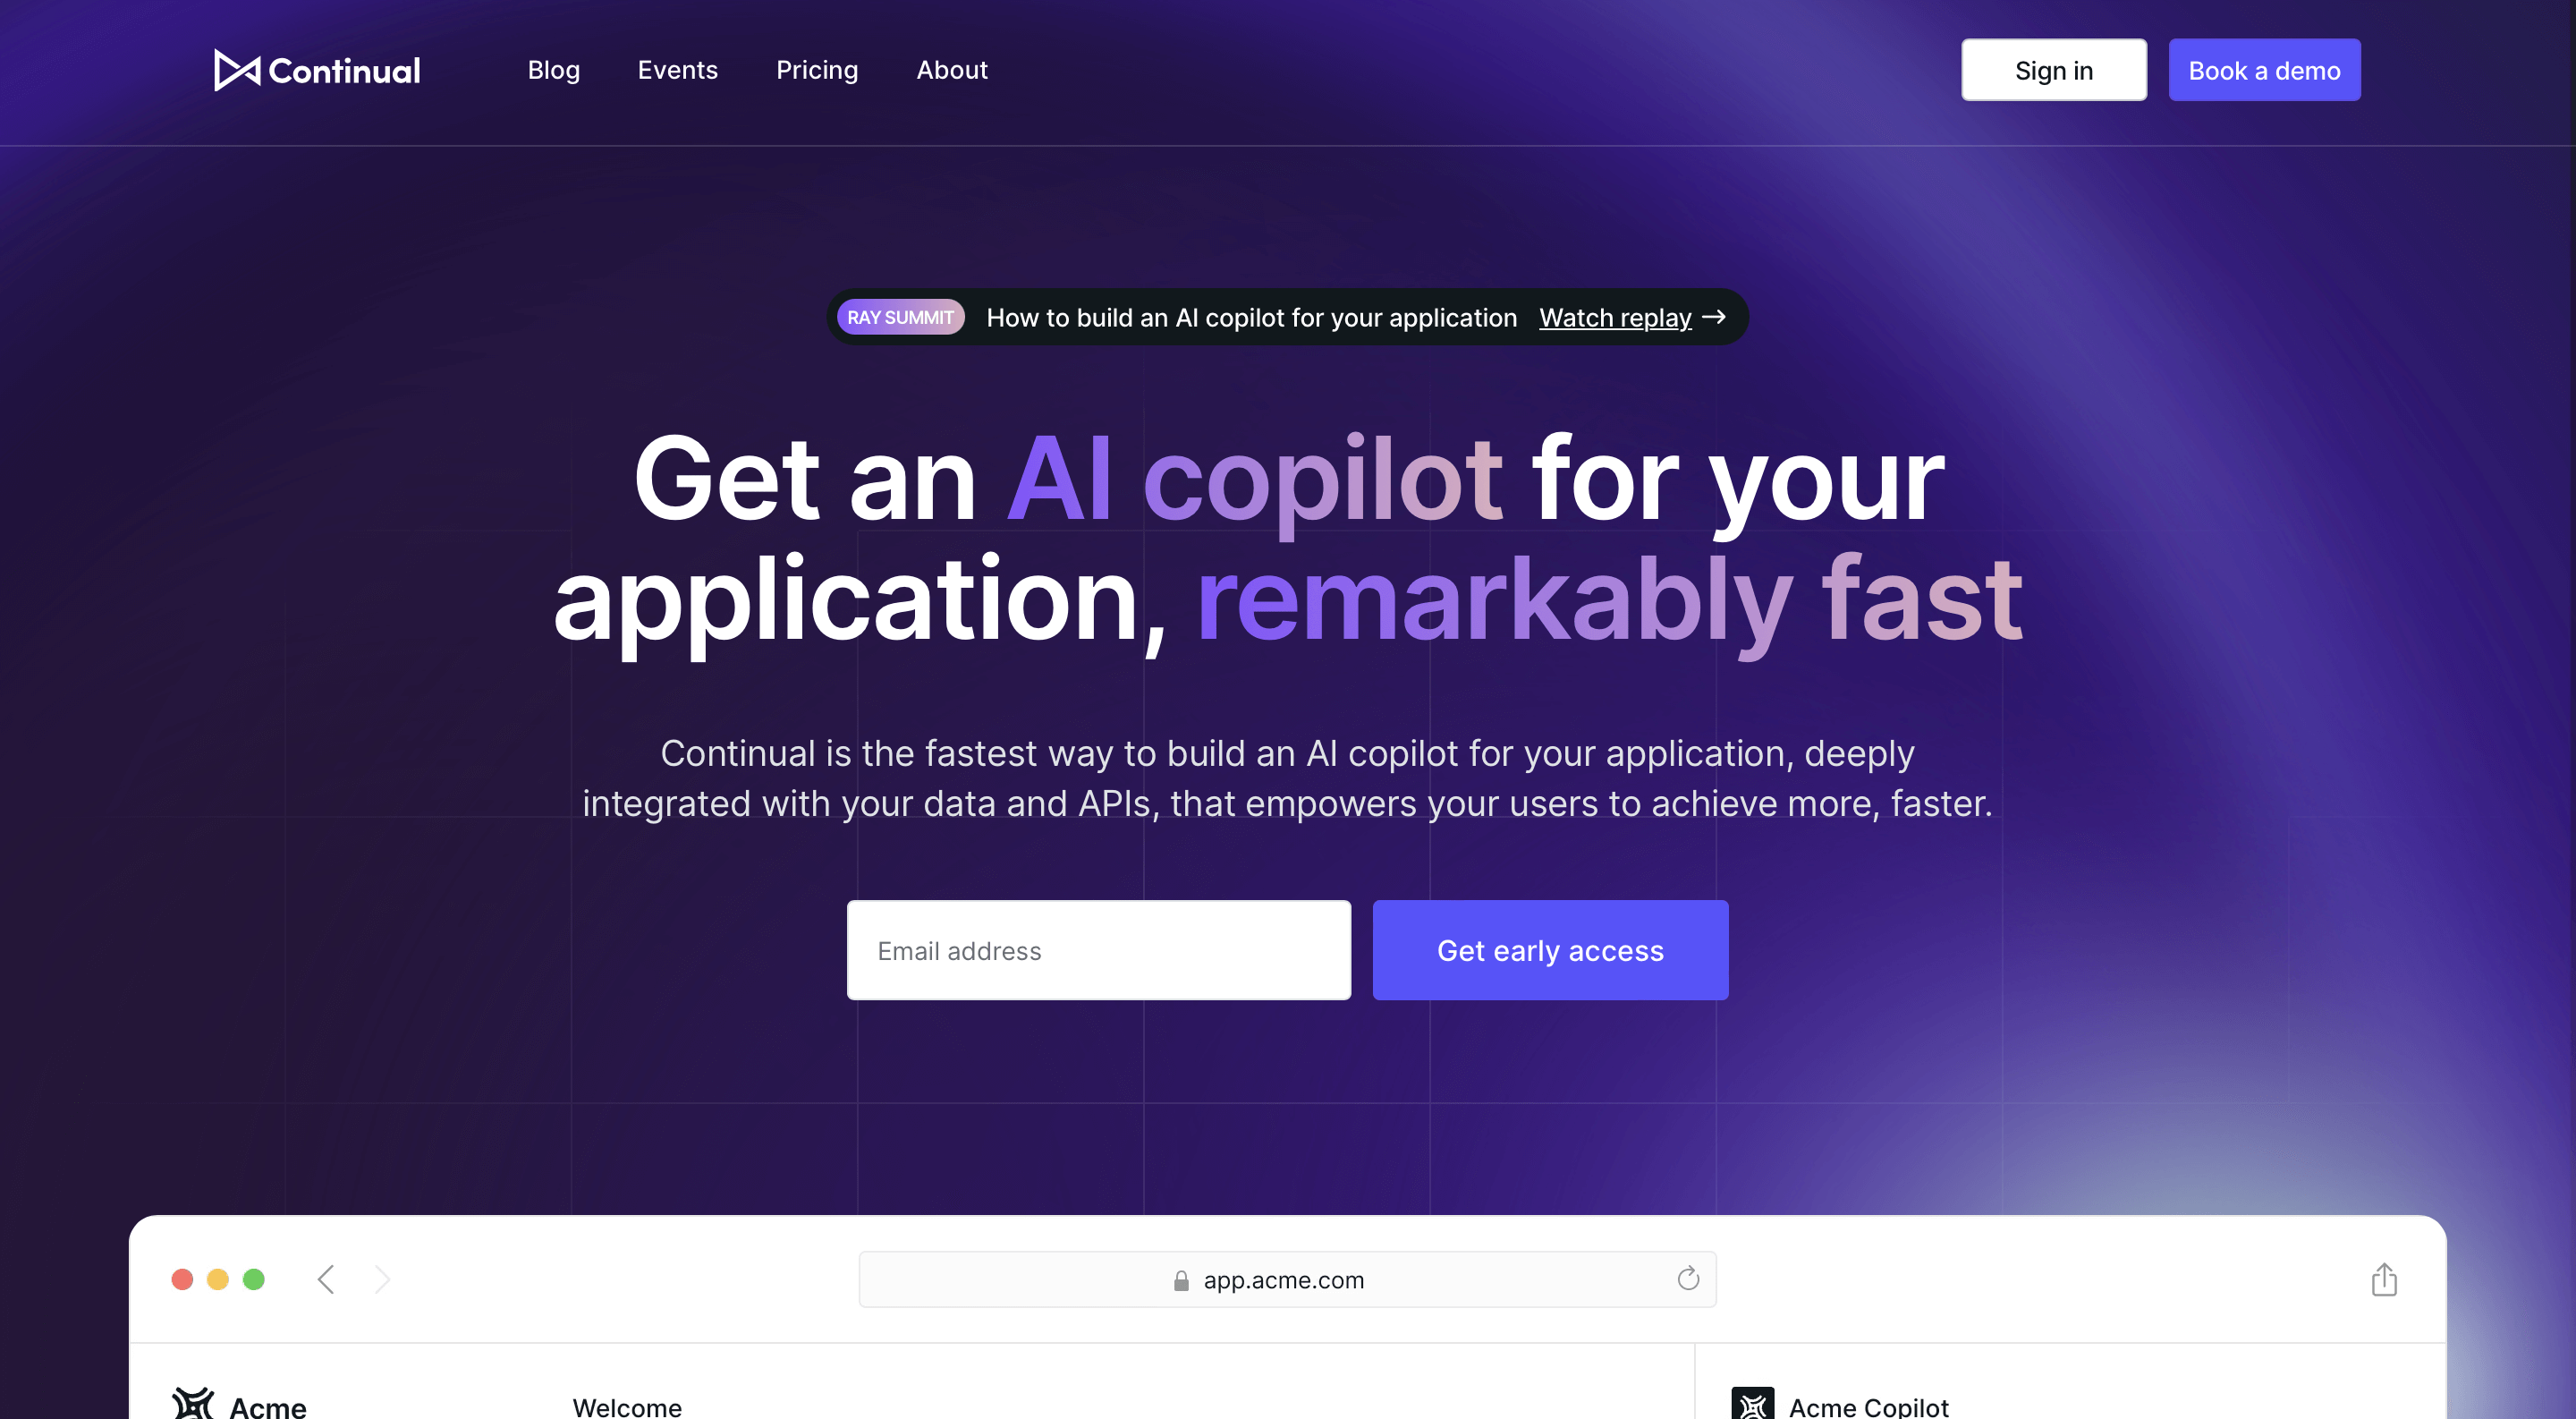 Empower your app with an AI copilot